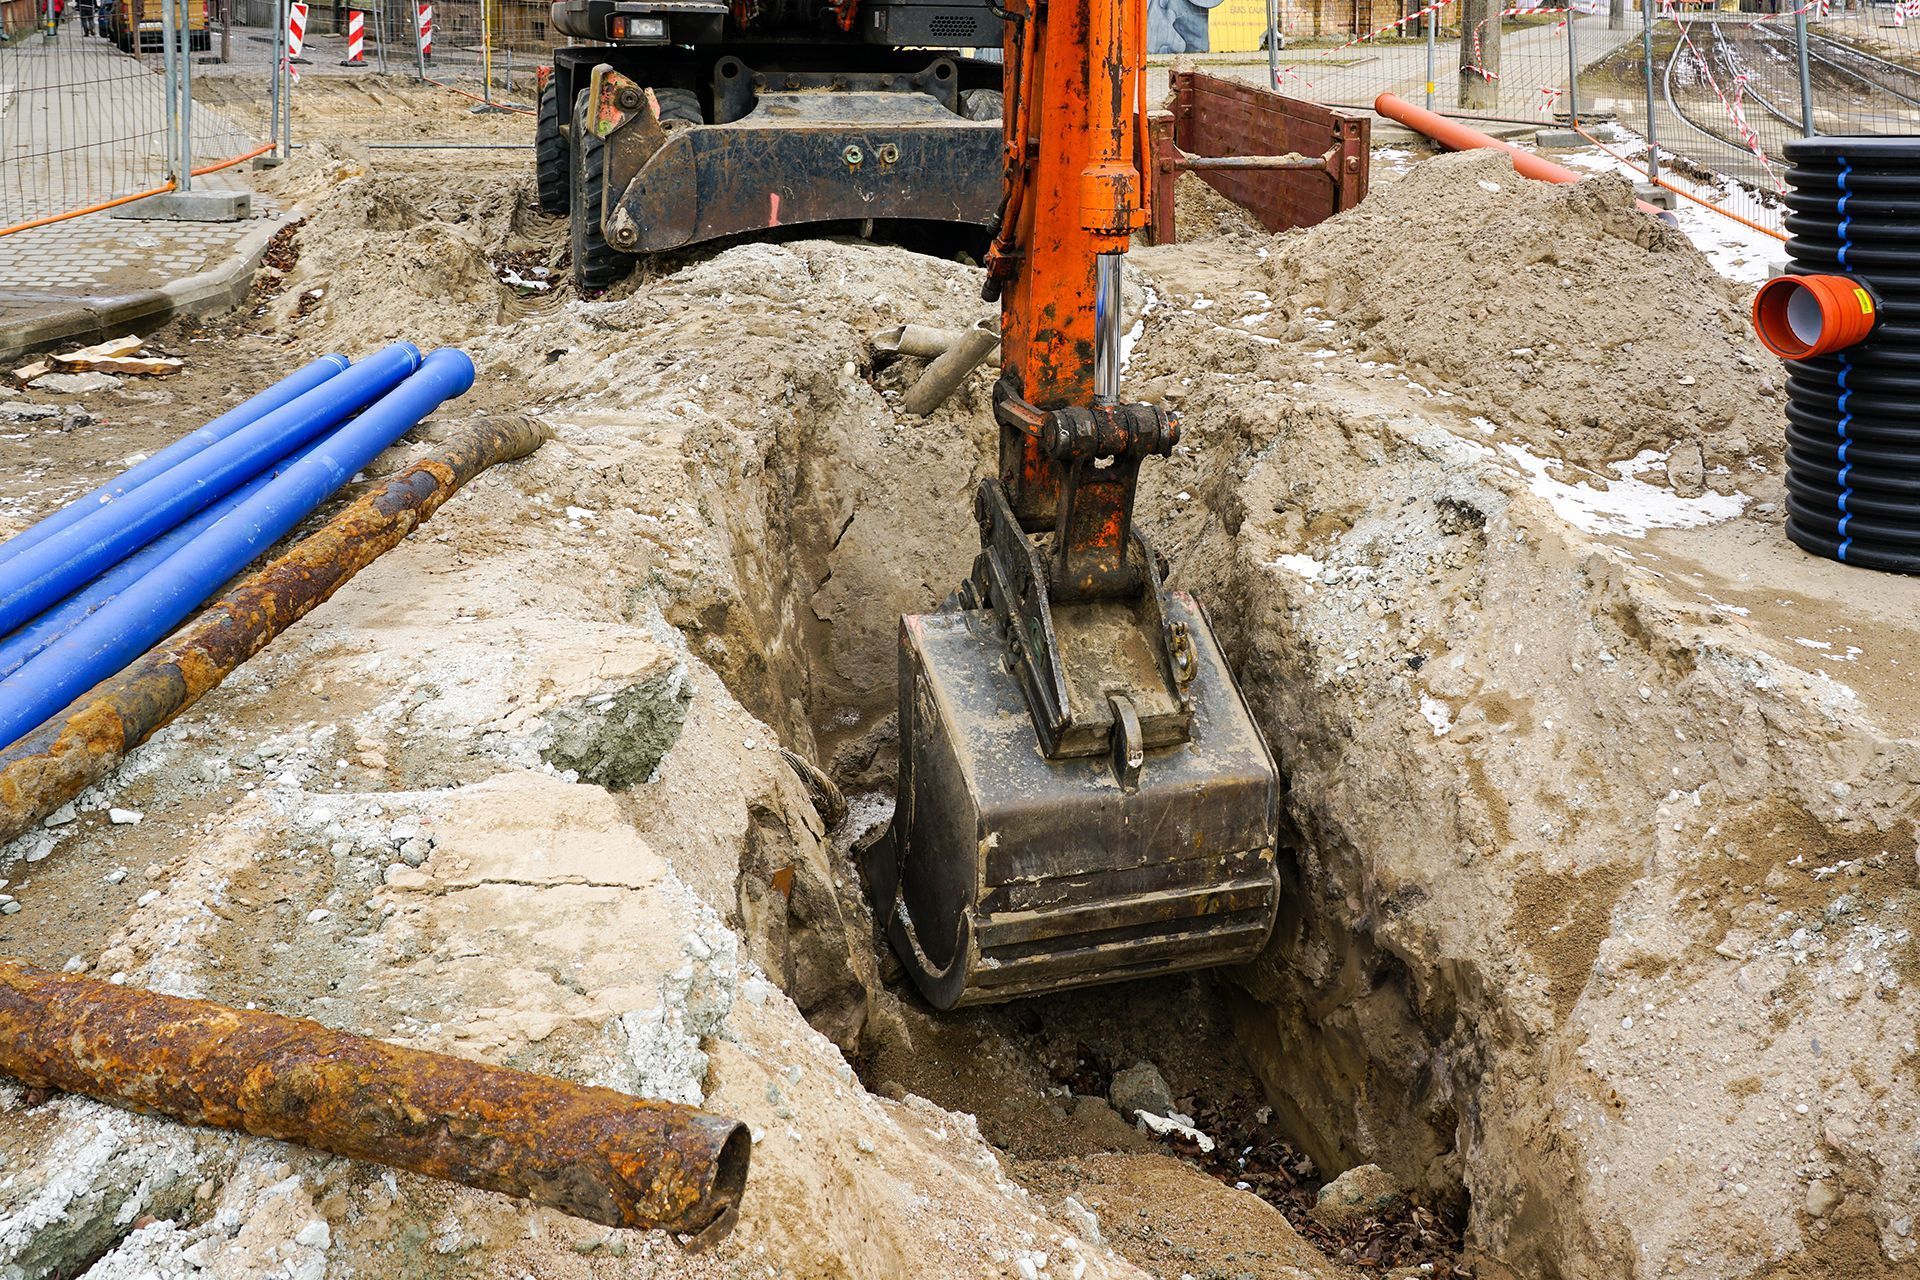 An excavator is digging a hole in the ground at a construction site.